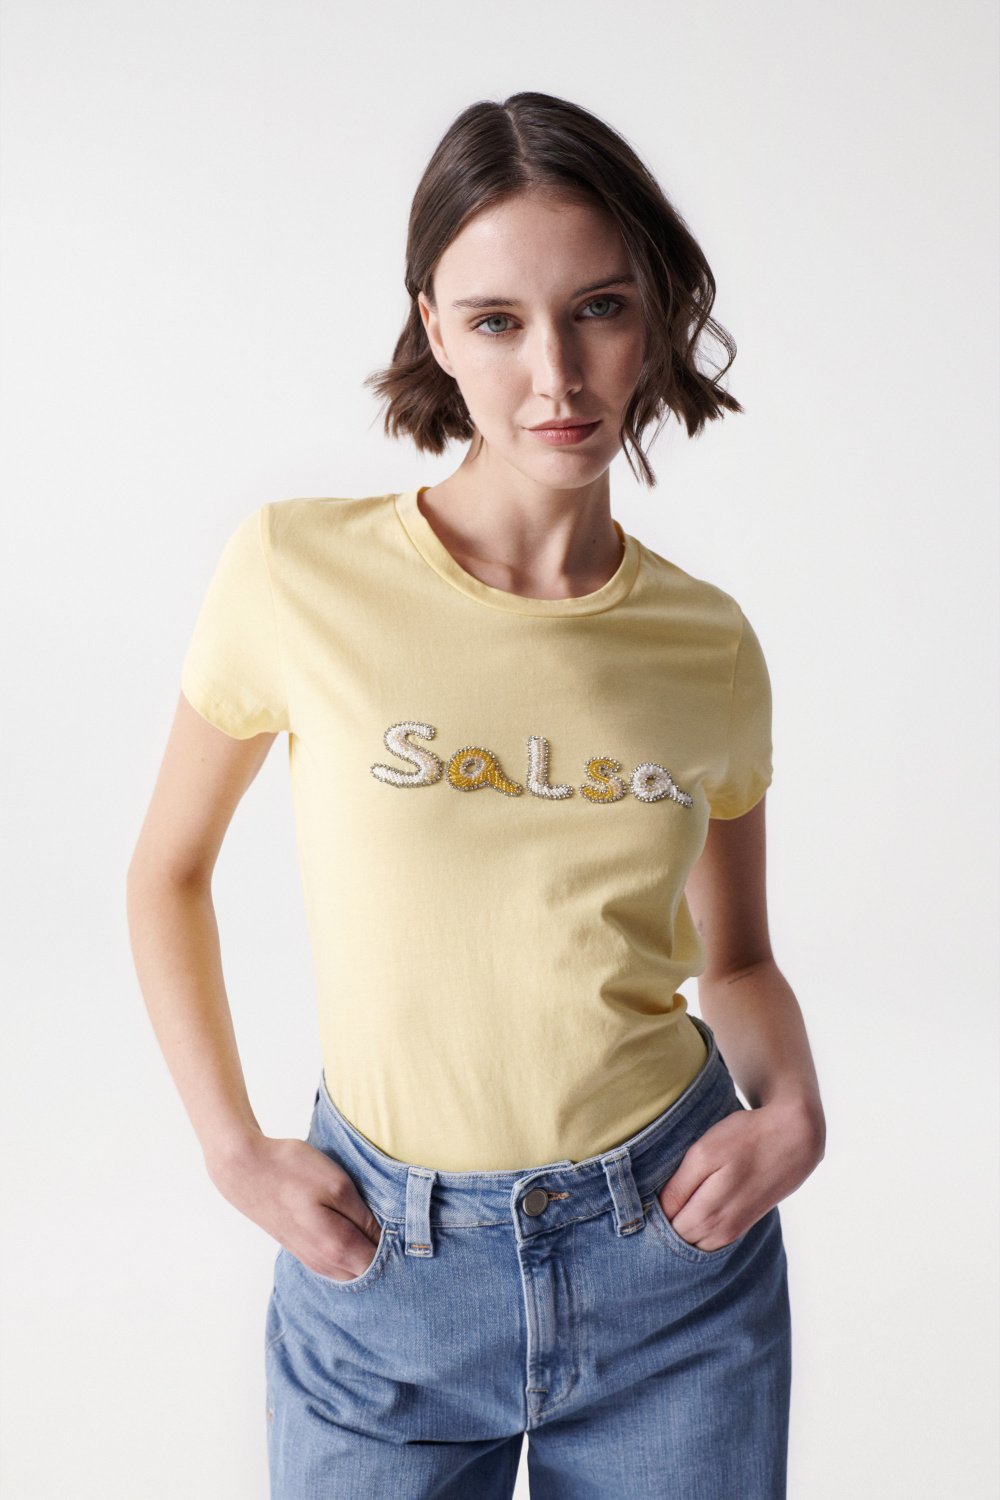 T-SHIRT WITH SALSA NAME IN BEADS - Salsa